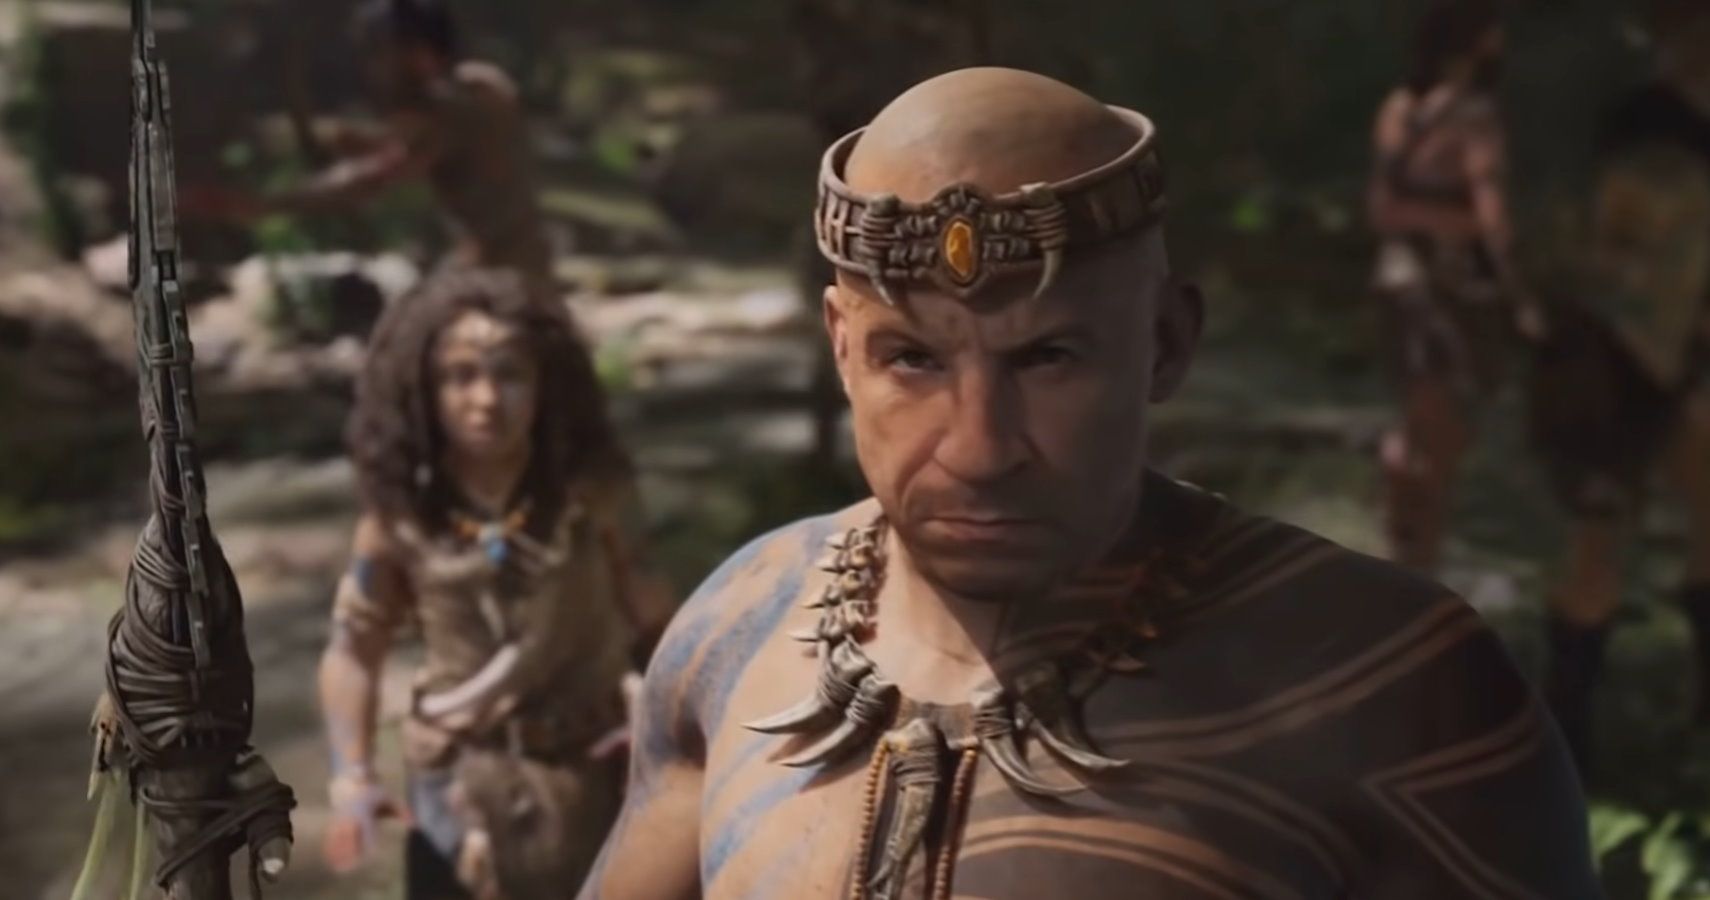 Vin Diesel Has Played "Thousands Of Hours" Of Ark: Survival Evolved And Even Reported Bugs